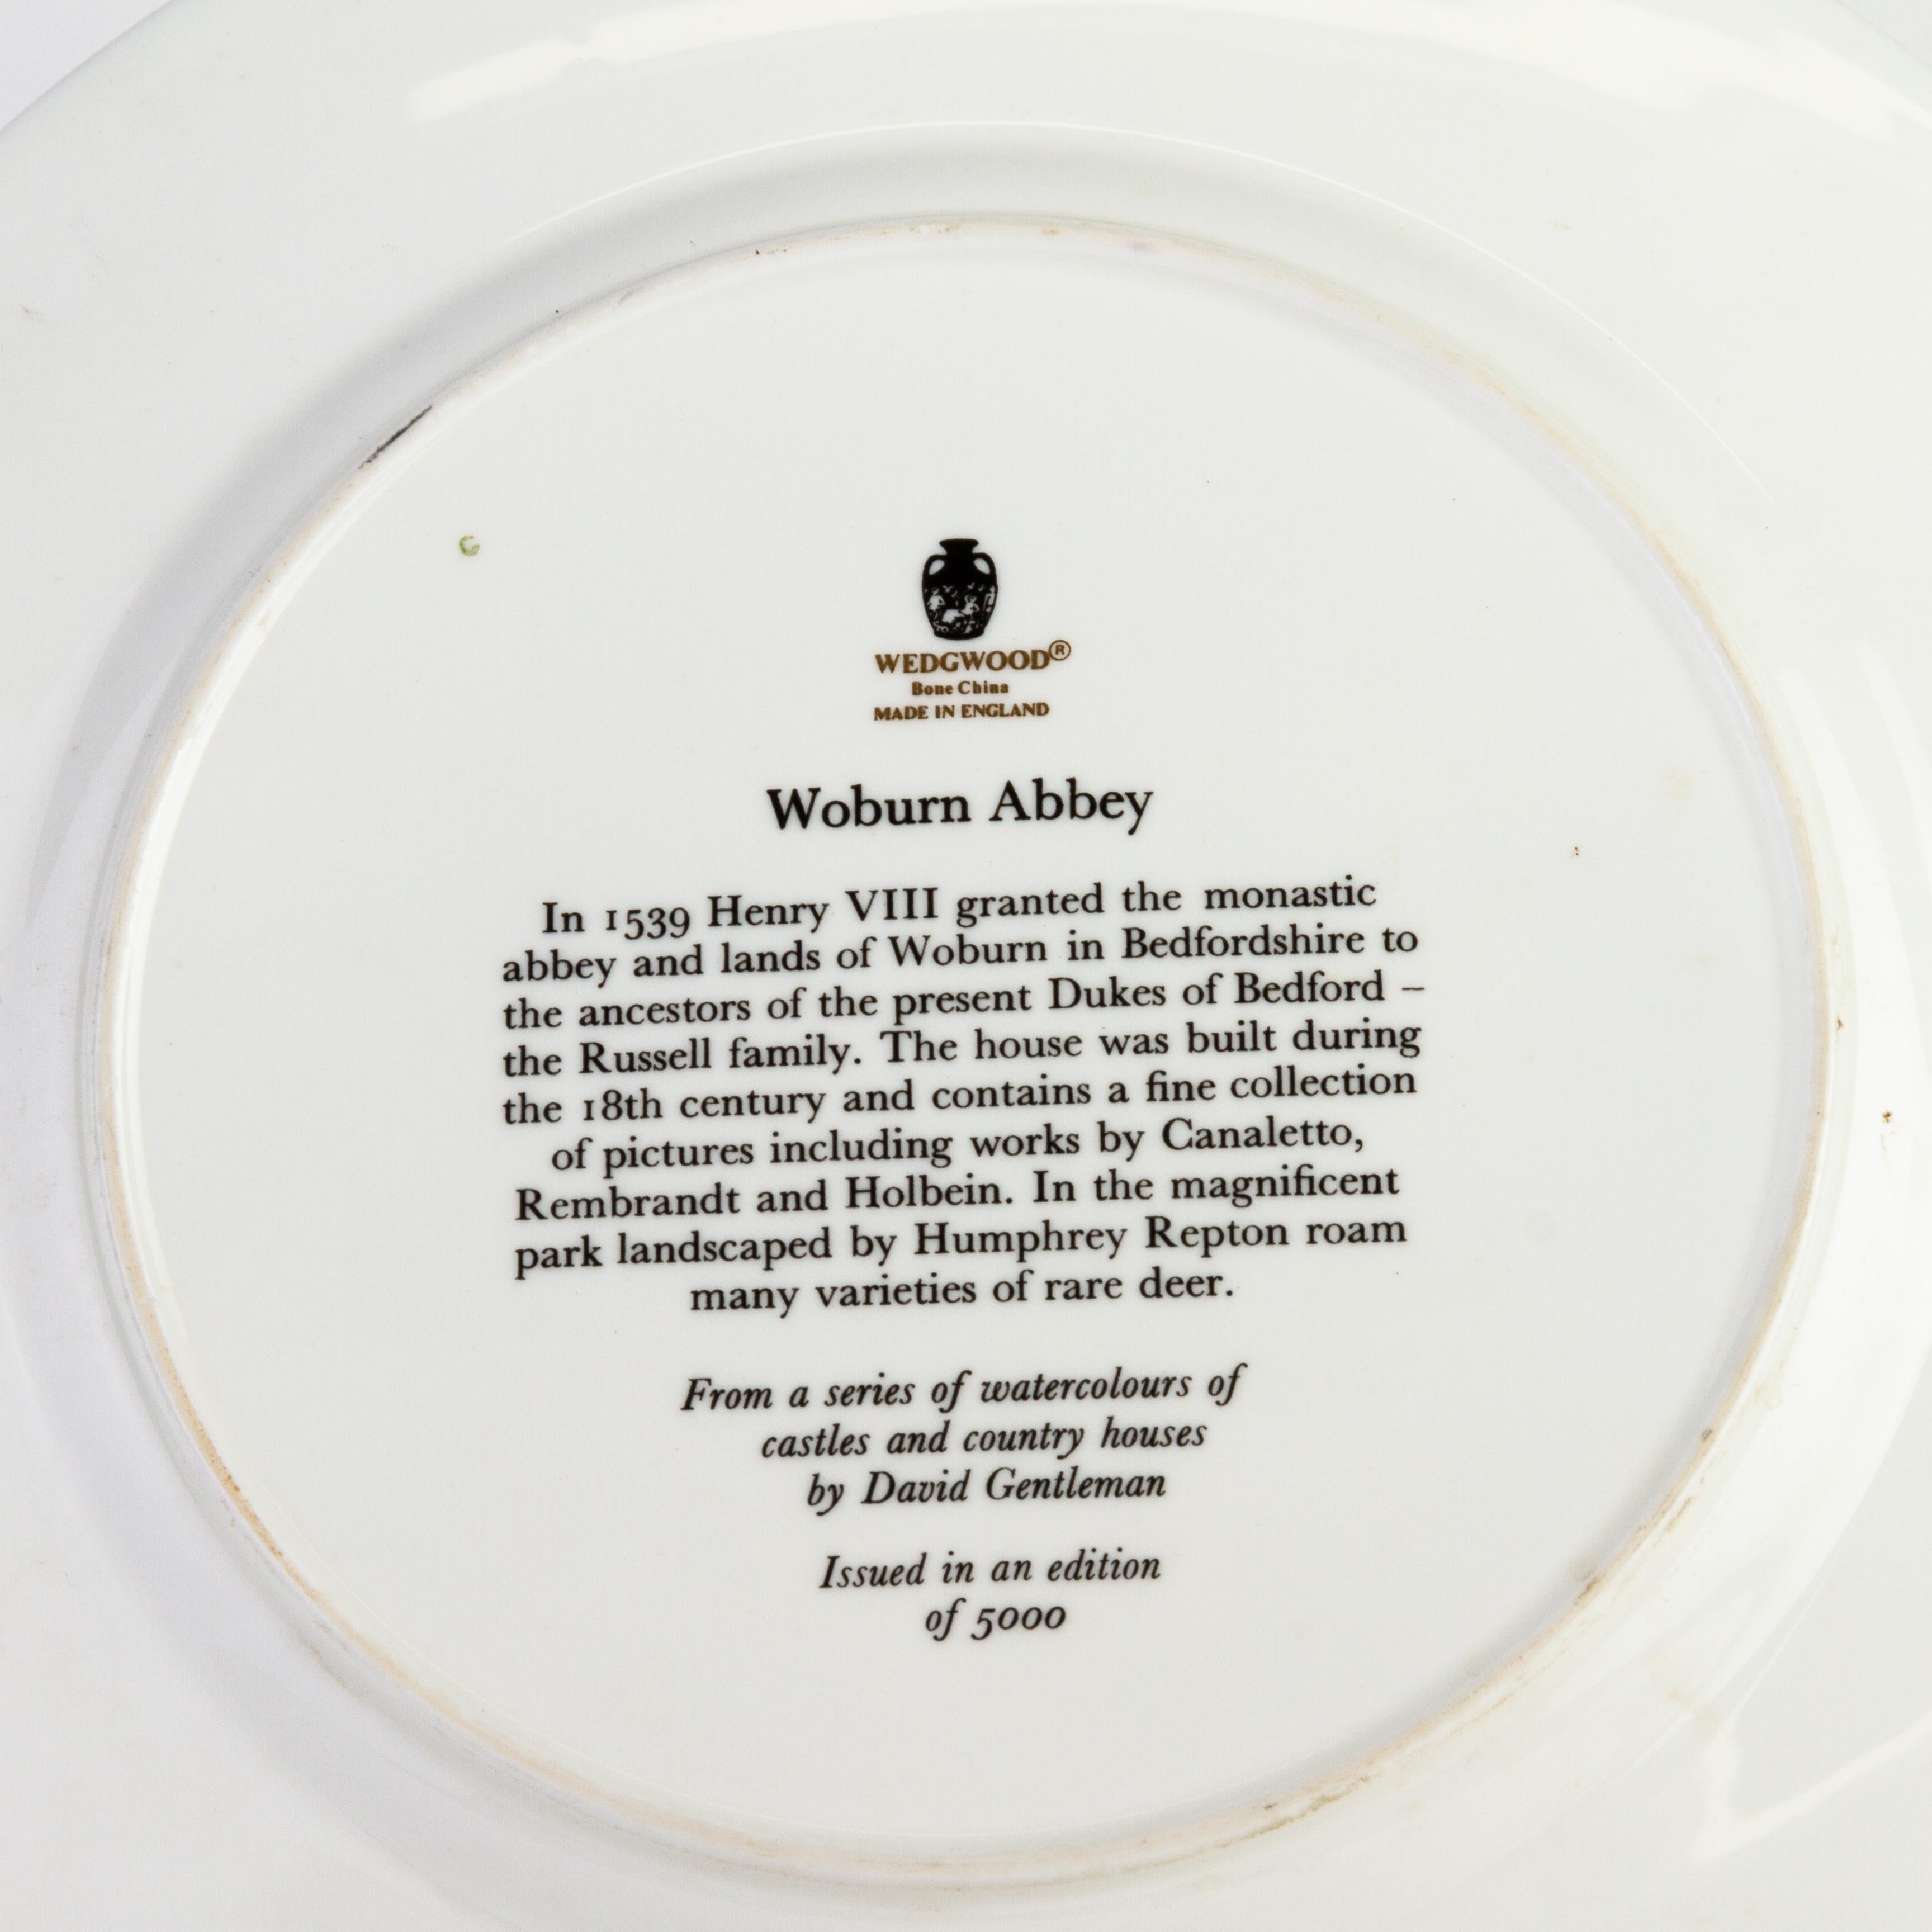 Wedgwood Fine English Porcelain Plate Depicting Woburn Abbey For Sale 2